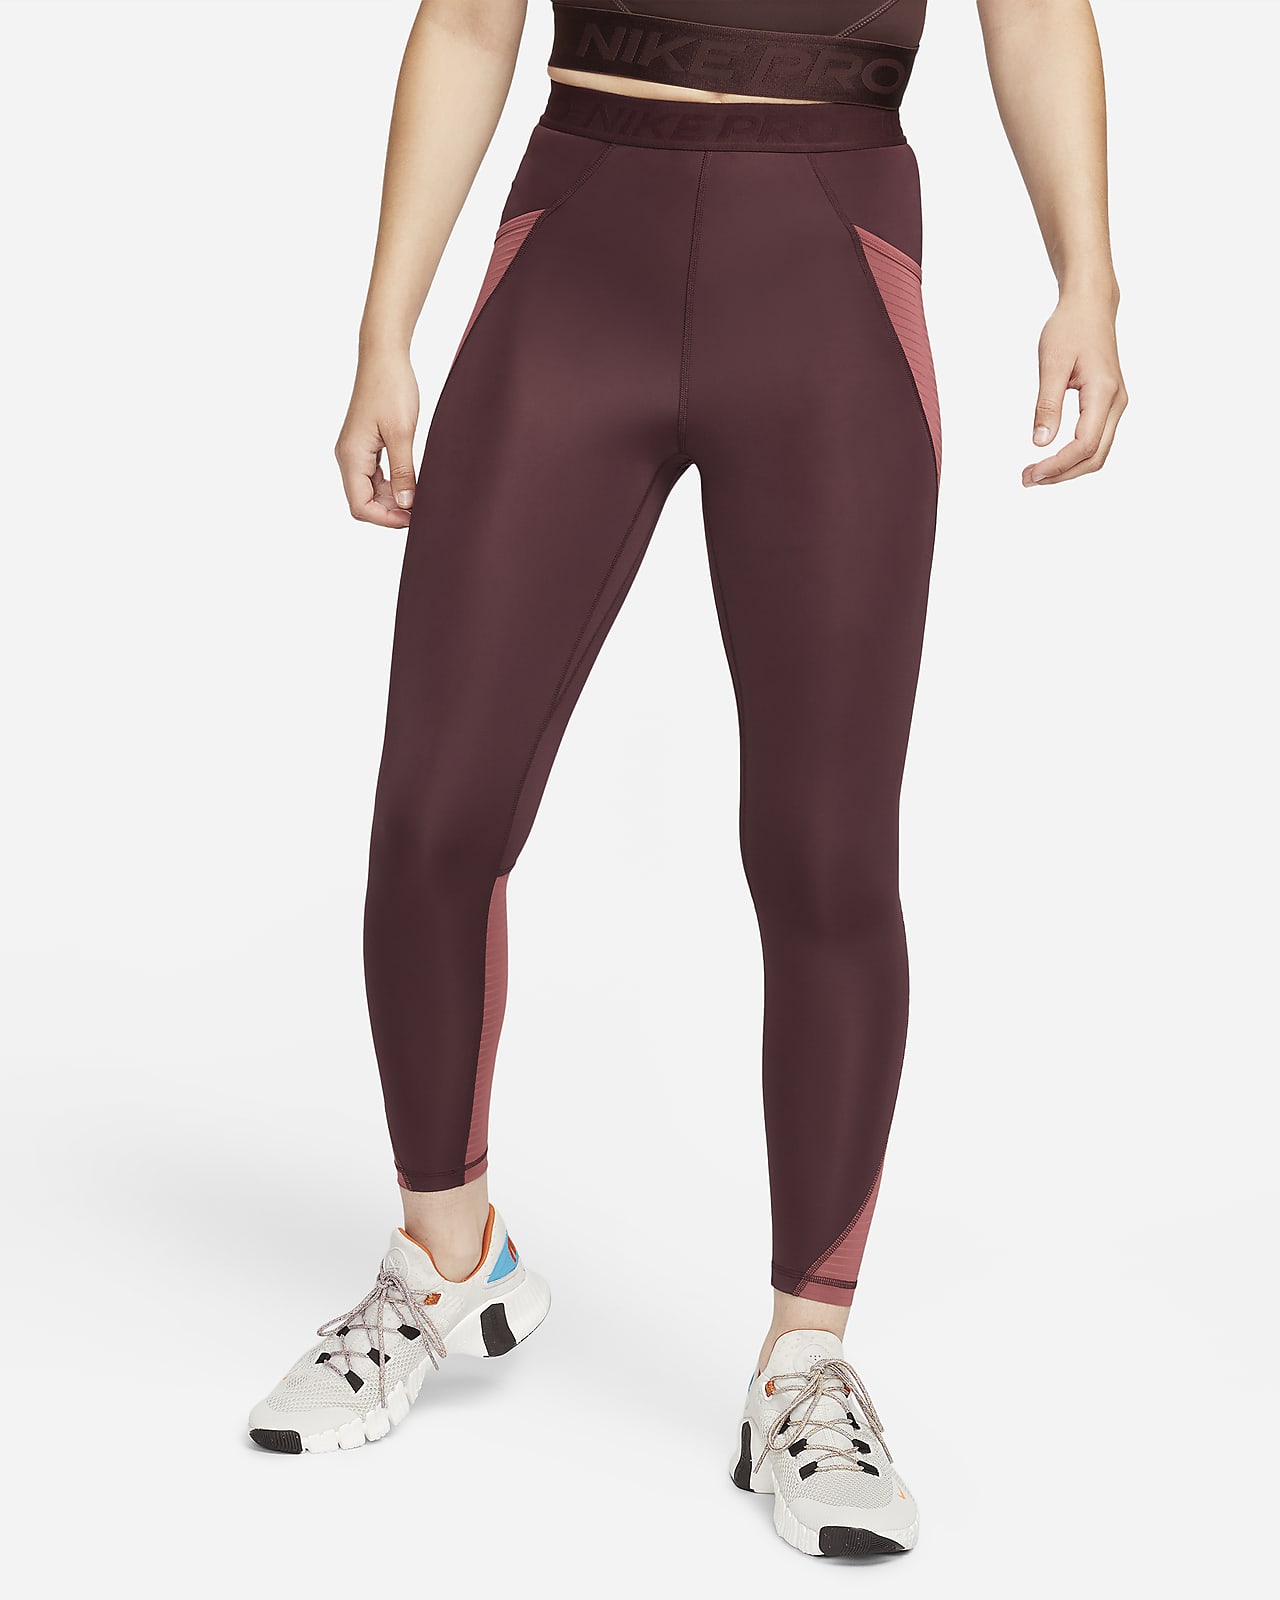 Shop Go Women's Firm-Support Mid-Rise 7/8 Leggings with Pockets | Nike KSA